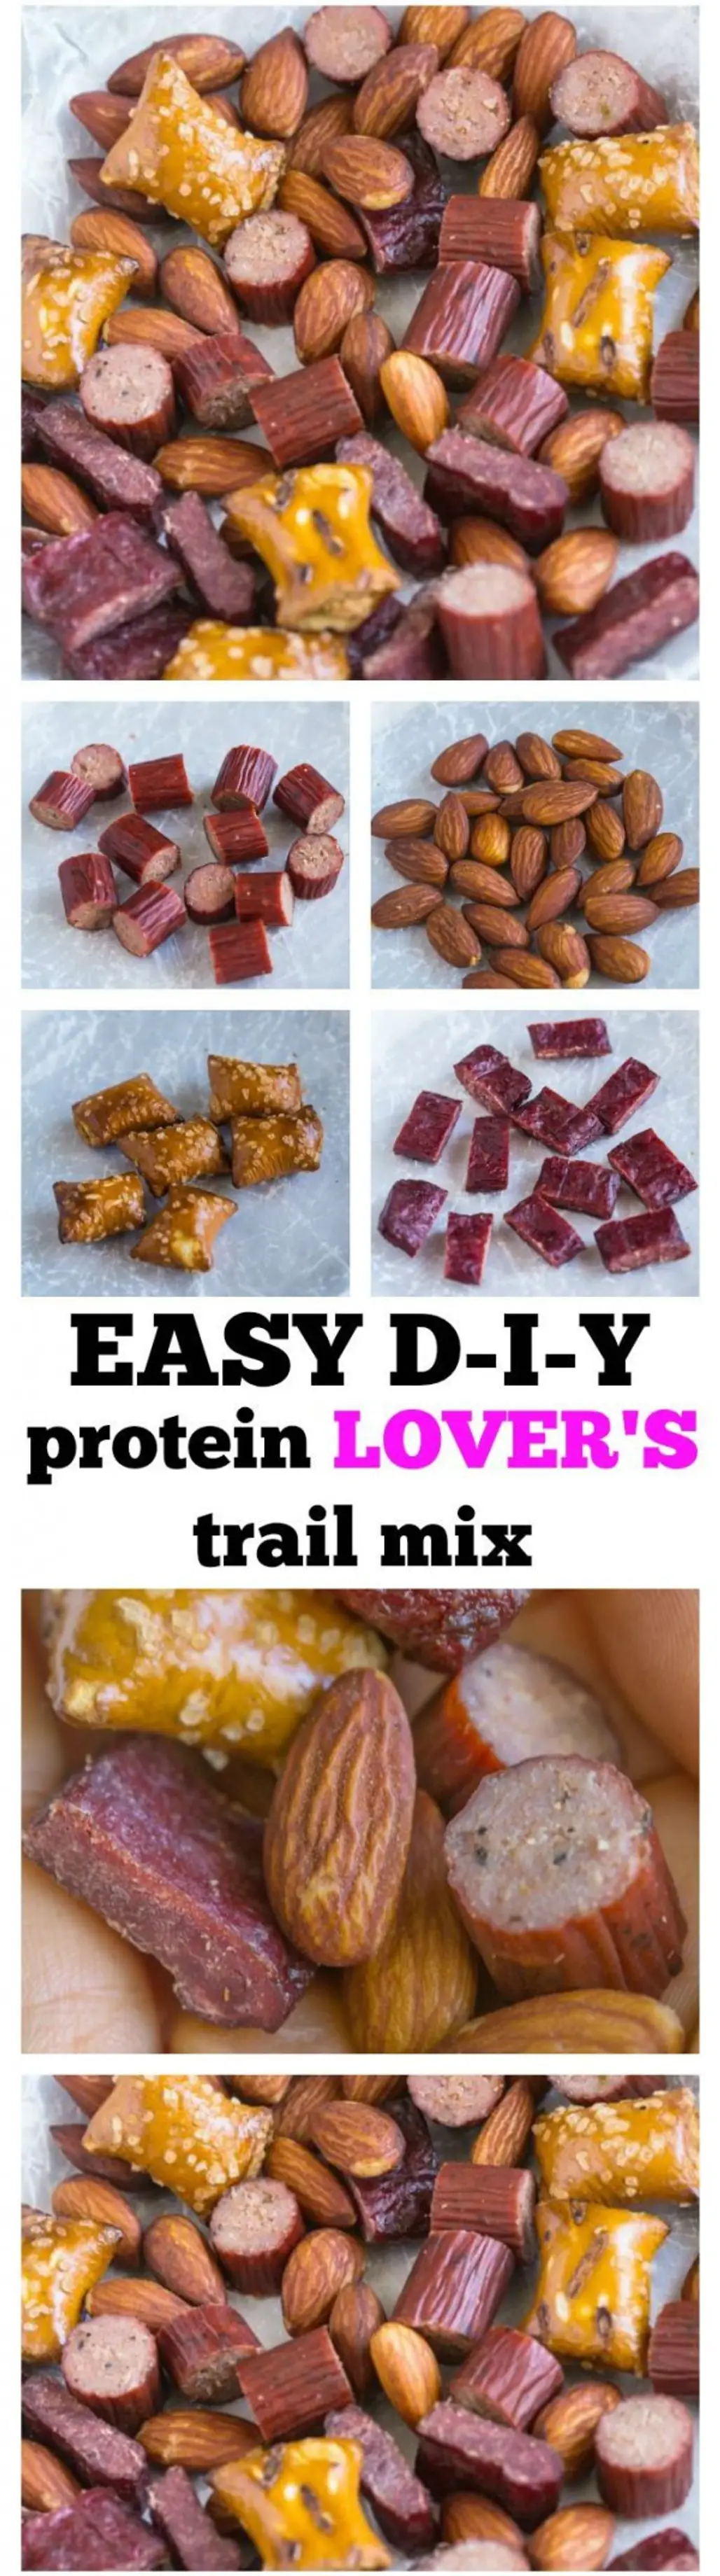 Protein Lover's Trail Mix